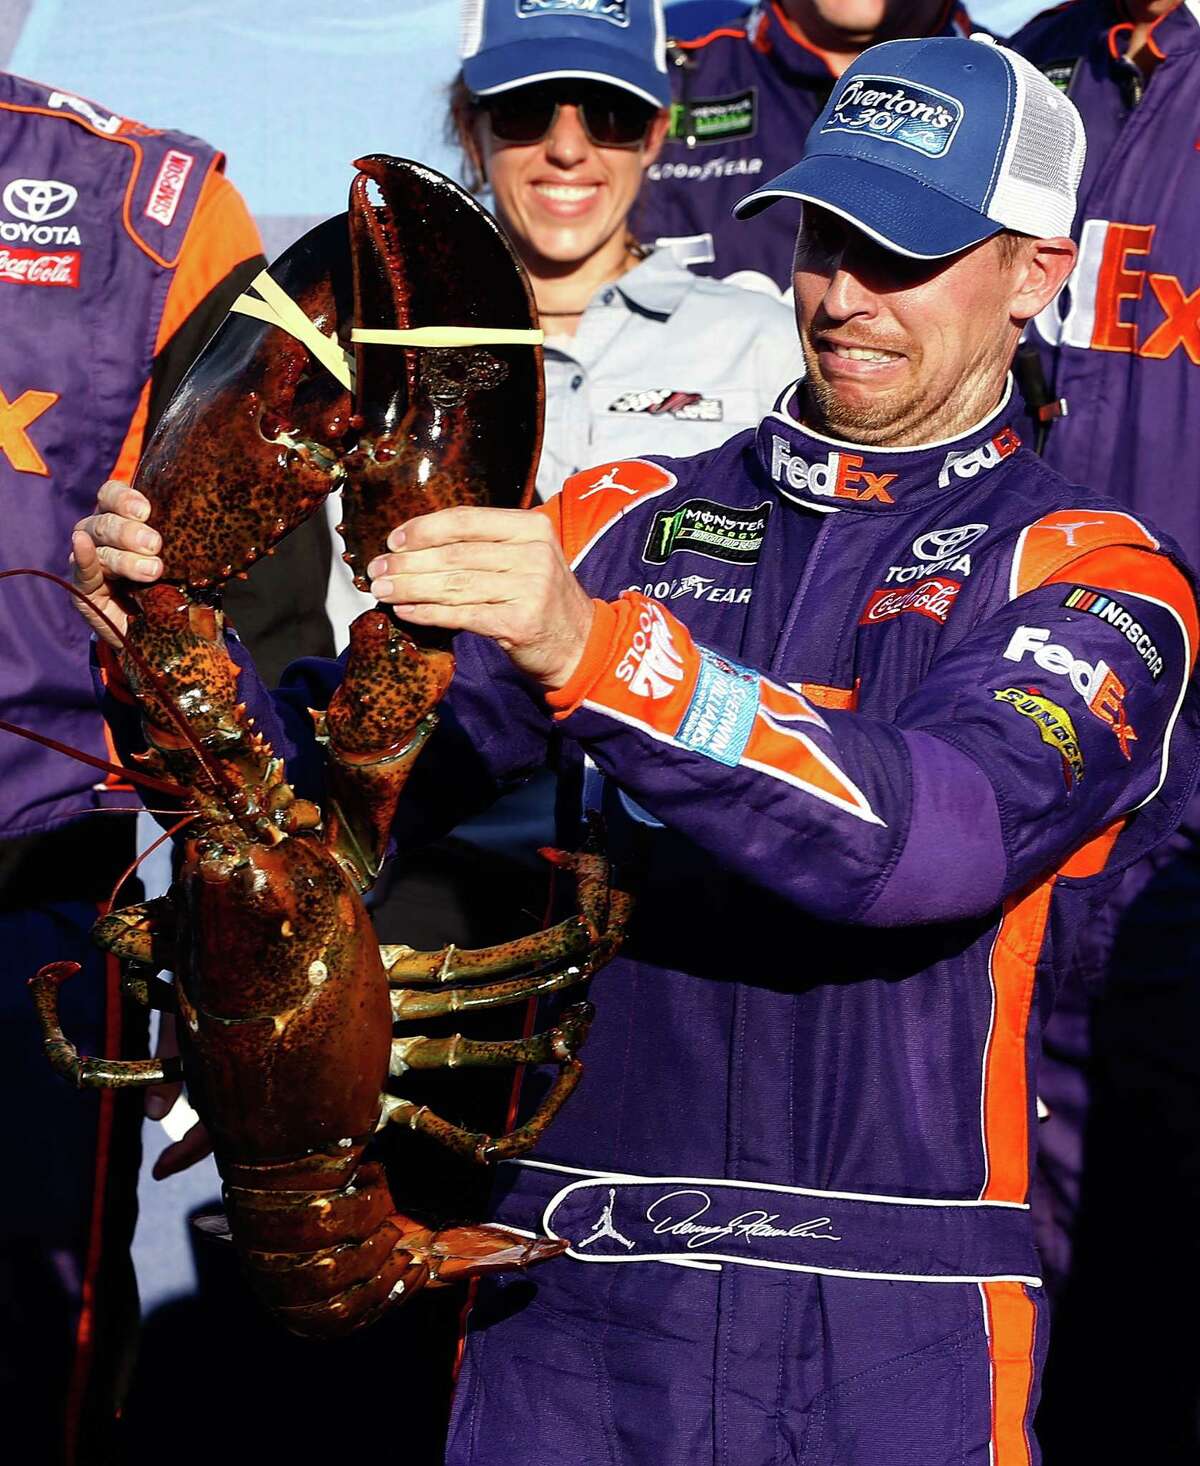 It was Denny Hamlin's turn at a much-celebrated New Hampshire Motor Speedway tradition - posing and grimacing with a giant lobster - after winning the Monster Energy Cup race Sunday.